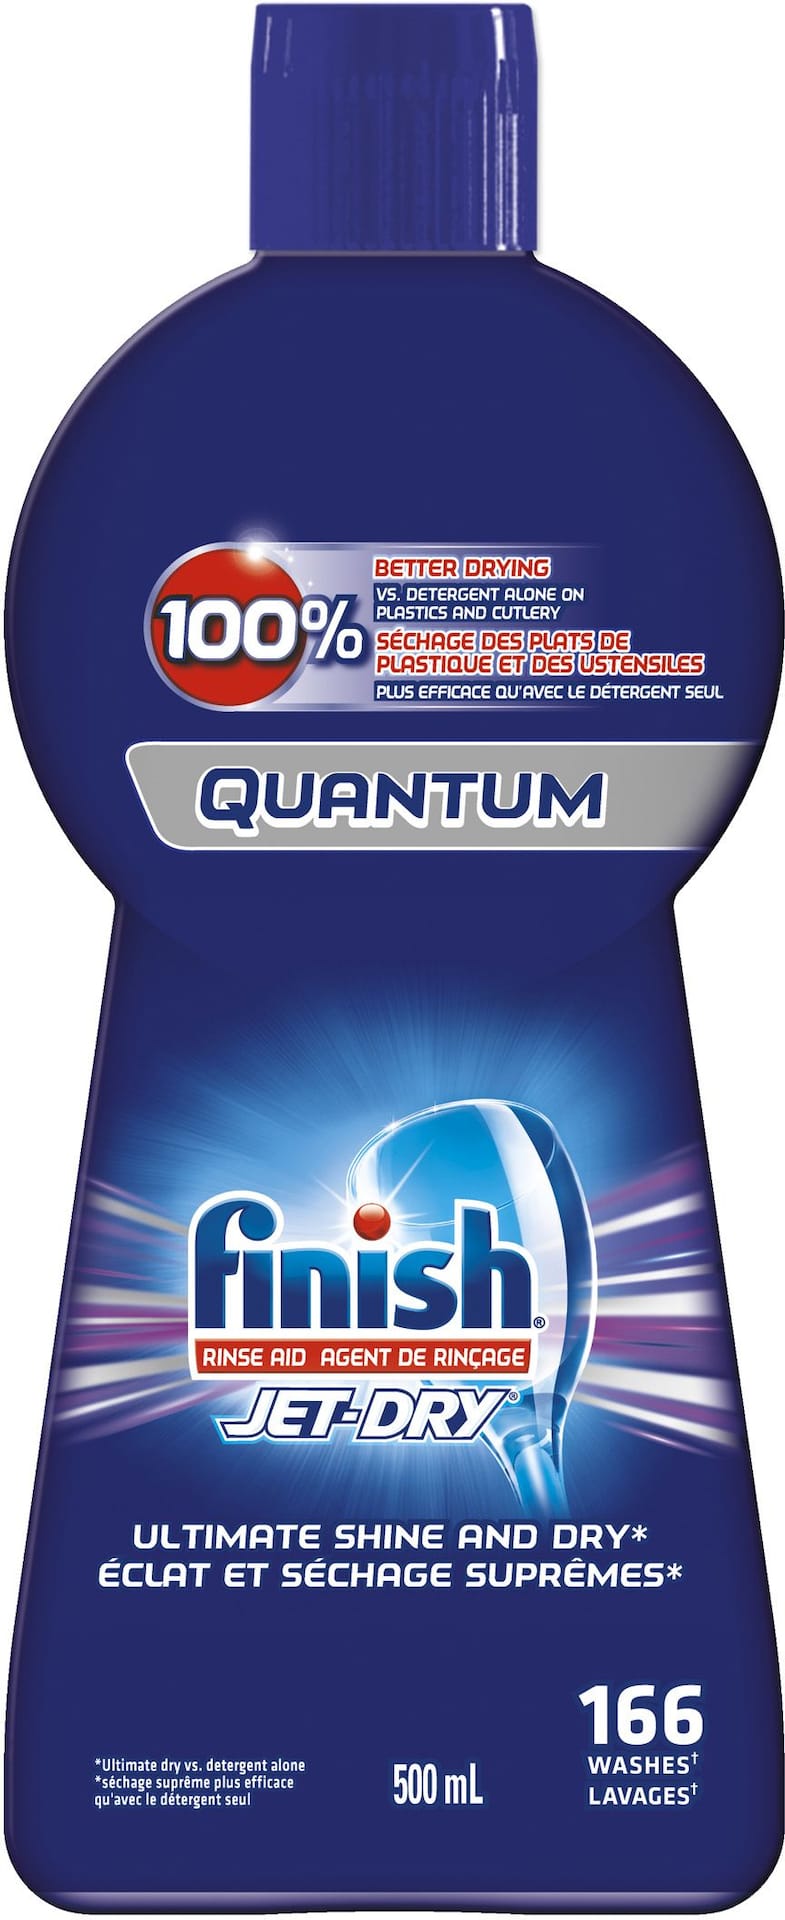 https://media-www.canadiantire.ca/product/living/home-essentials/laundry-hand-dish-cleaning-solutions/1530529/finish-quantum-jet-dry-rinse-aid-500ml-e5560045-9c05-4f91-bd84-de917e782f3b-jpgrendition.jpg